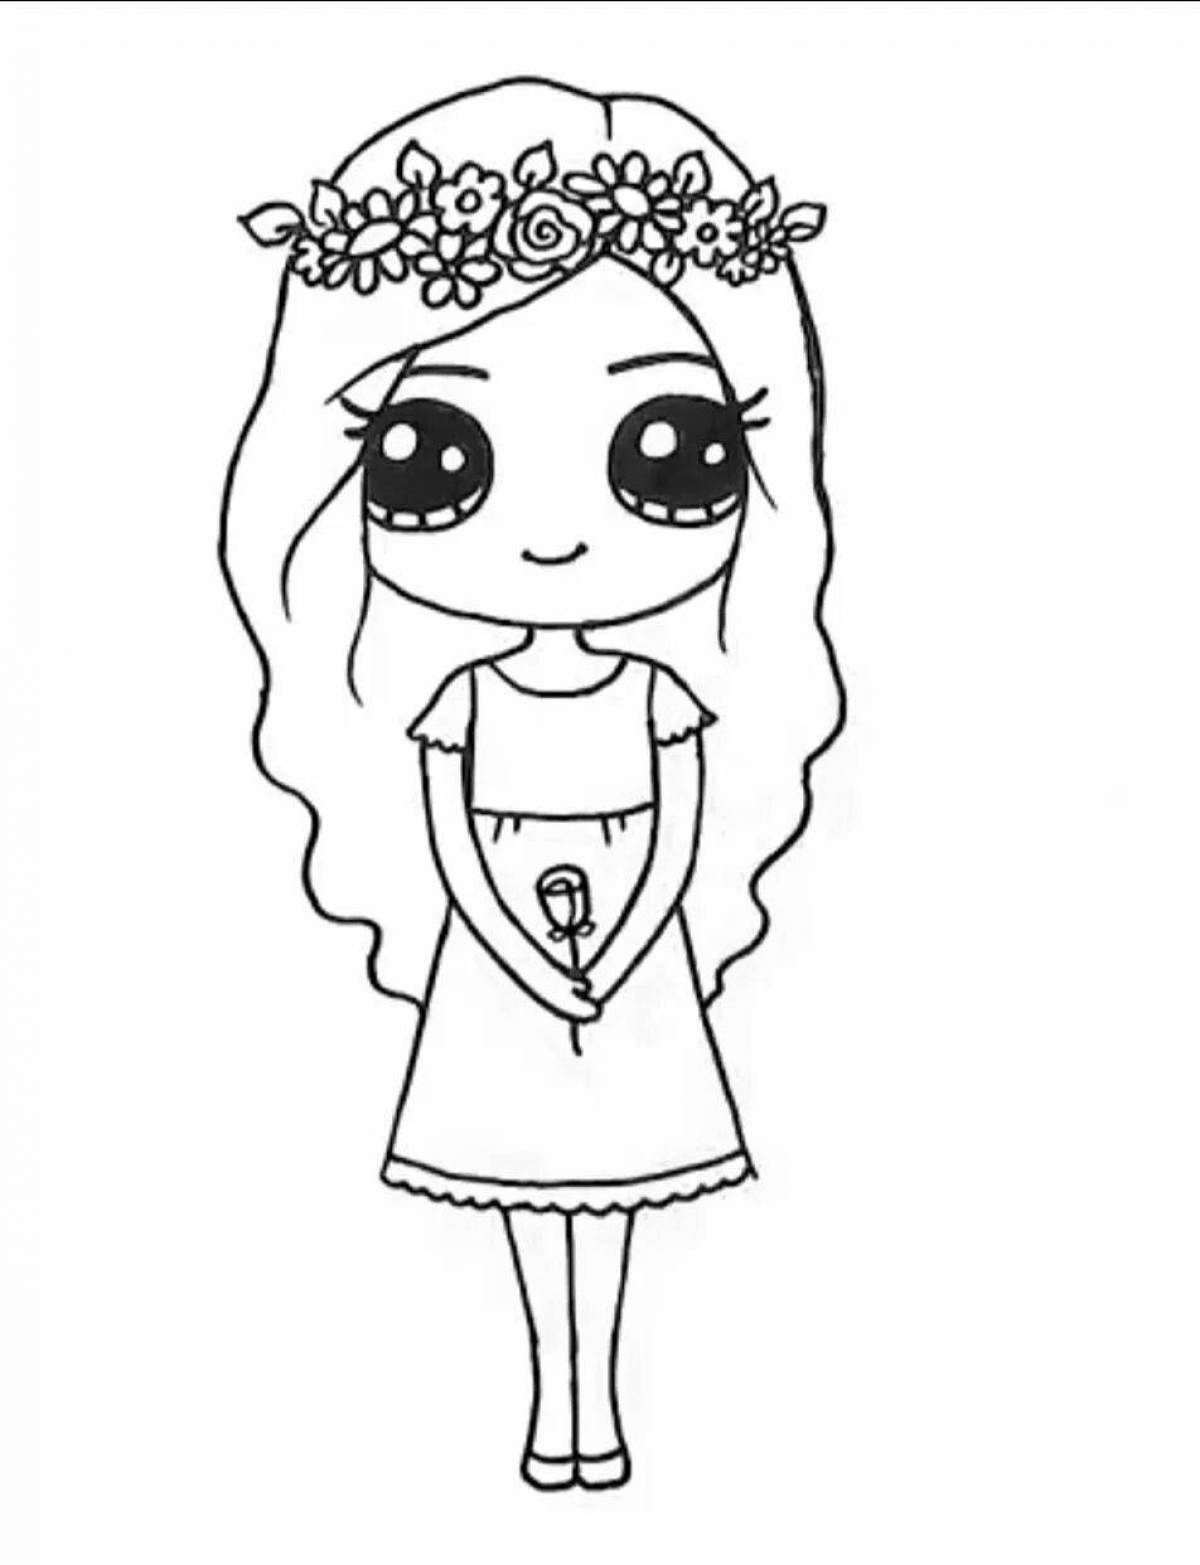 Awesome coloring pages for girls easy